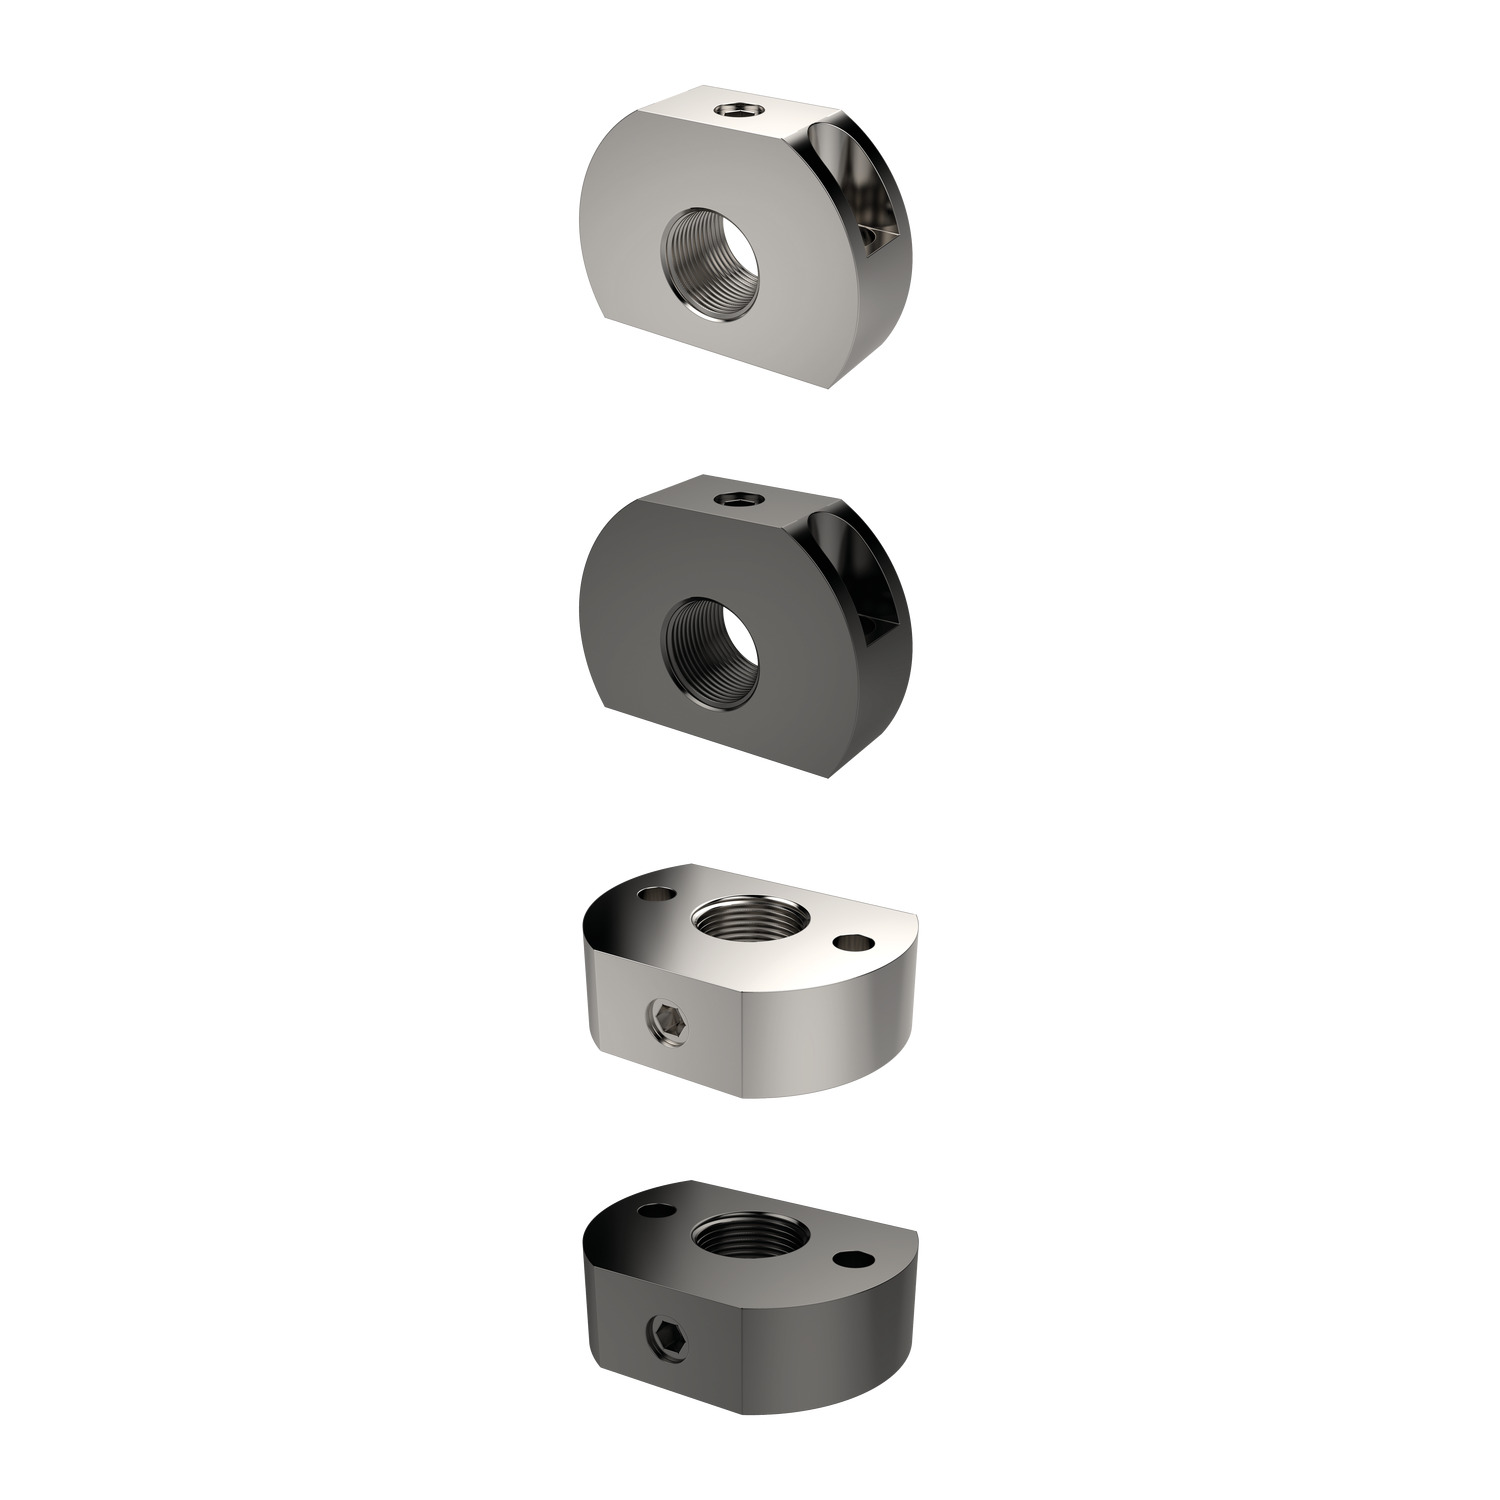 Mounting Blocks Mounting blocks for index plungers, fine thread. Available in steel or stainless steel. Mounting blocks provide assembly support for mounting of index plungers.